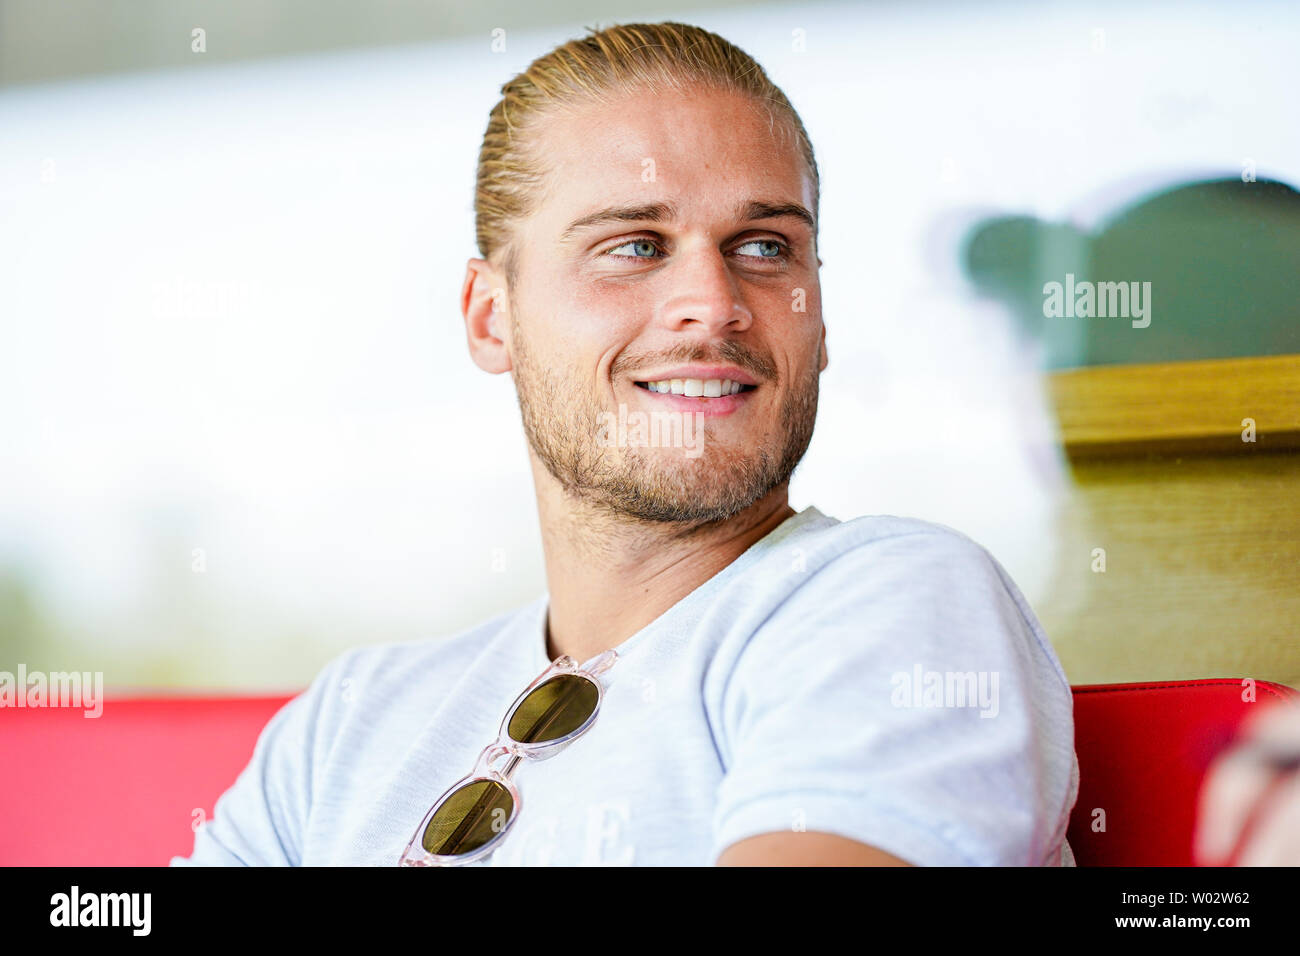 Sandhausen, Germany. 25th June, 2019. Rurik Gislason, player of the second division football team SV Sandhausen, is sitting on the stadium grandstand during a conversation. Gislason from SV Sandhausen became world famous a year ago. Not because he delivered sensational performances for Iceland at the World Cup in Russia, but because of his appearance. (to dpa 'One year after the hype: The new life of the 'beautiful' Rurik Gislason') Credit: Uwe Anspach/dpa/Alamy Live News Stock Photo